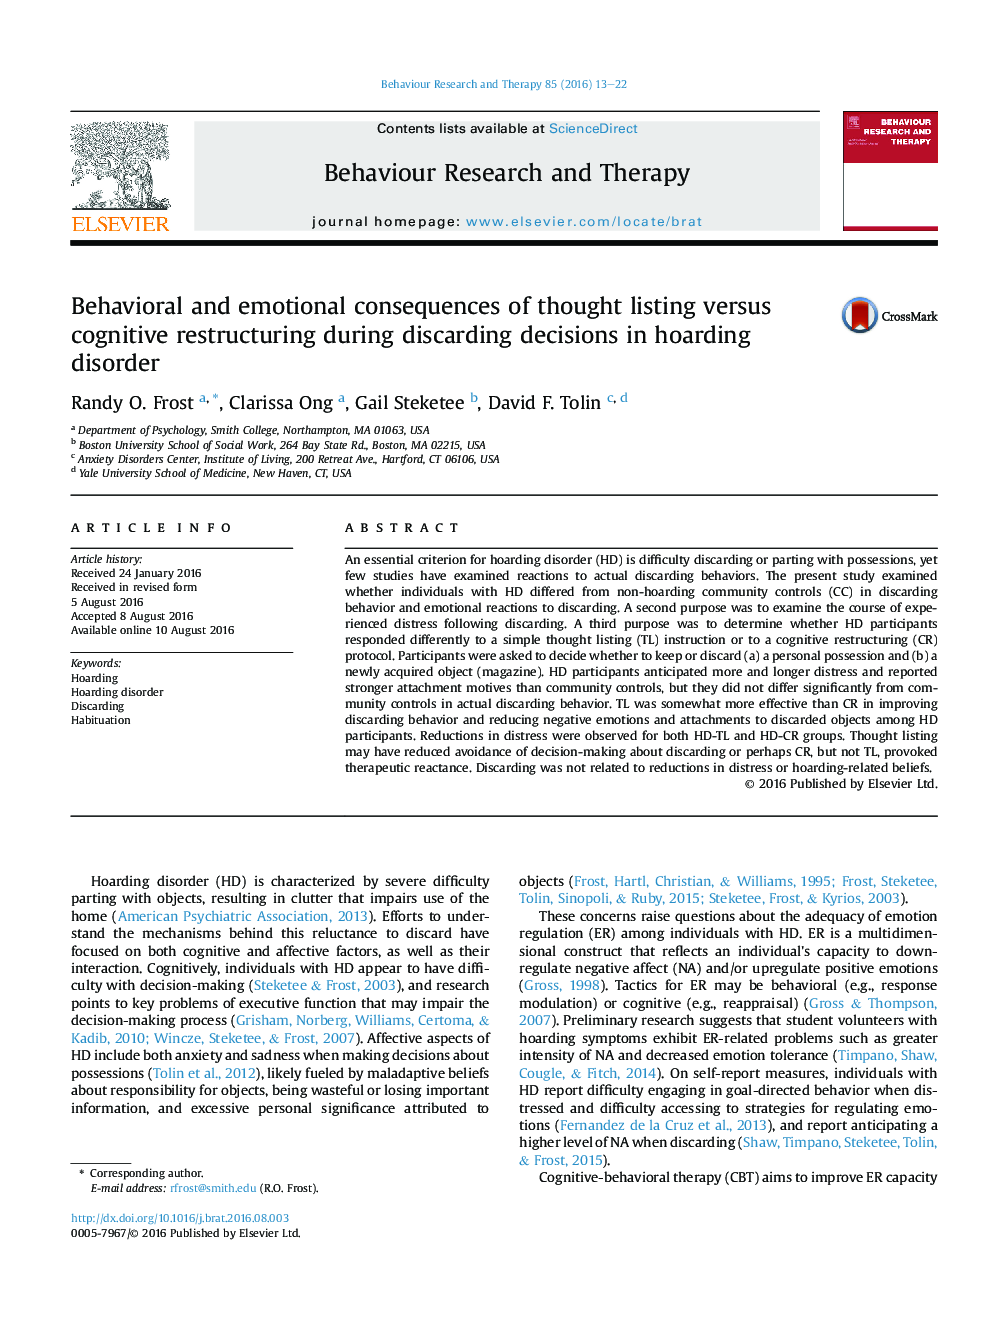 Behavioral and emotional consequences of thought listing versus cognitive restructuring during discarding decisions in hoarding disorder